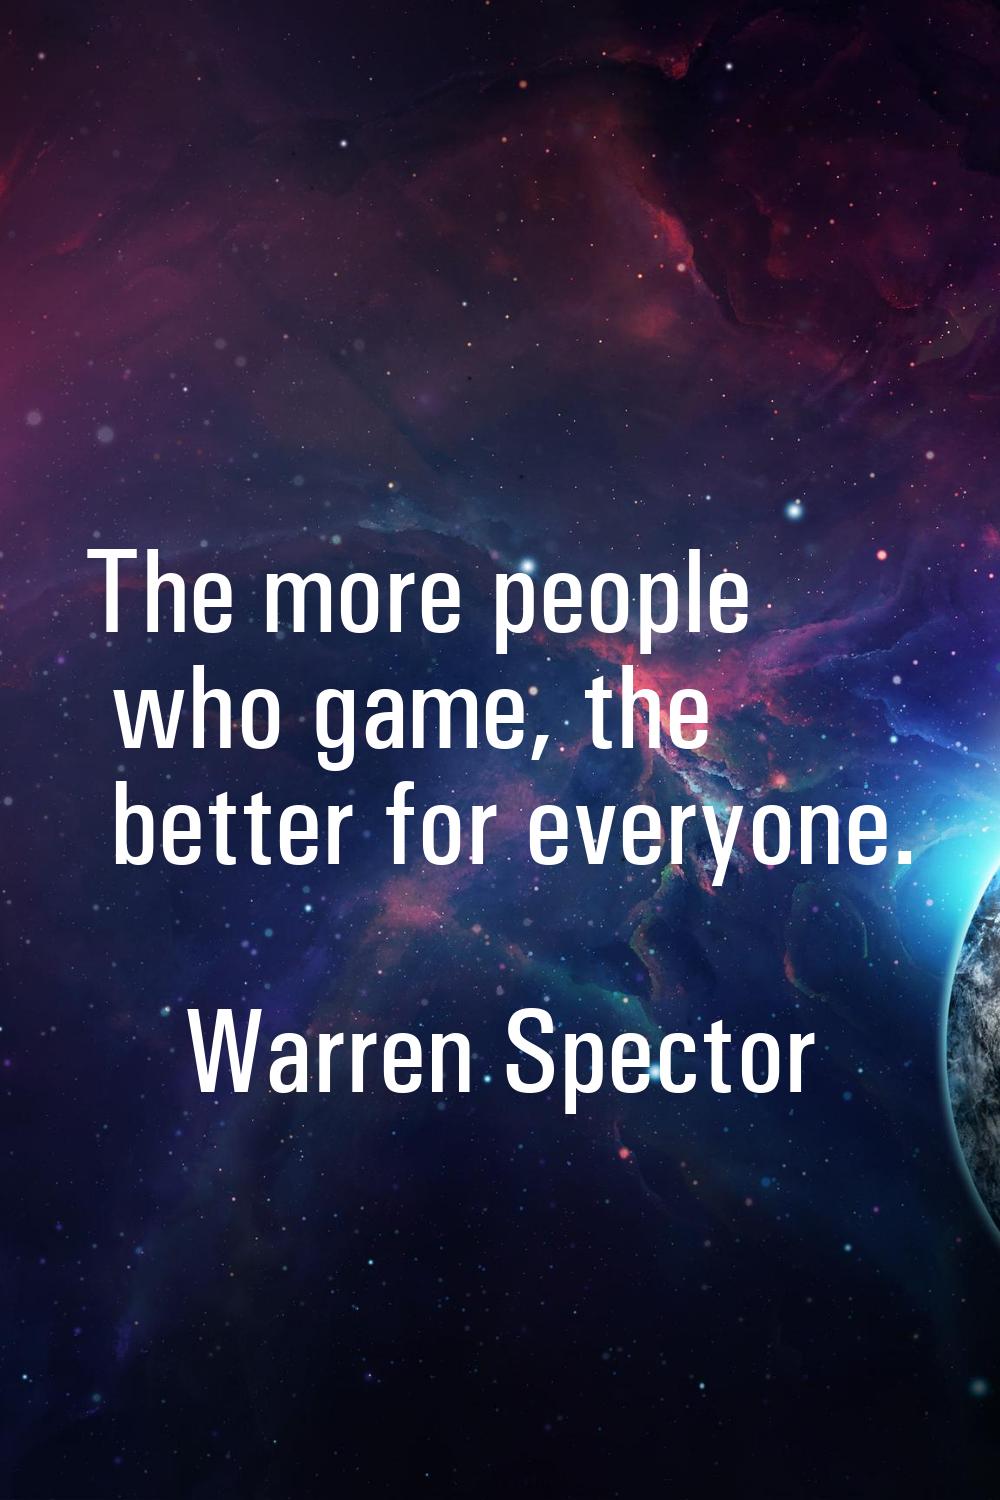 The more people who game, the better for everyone.